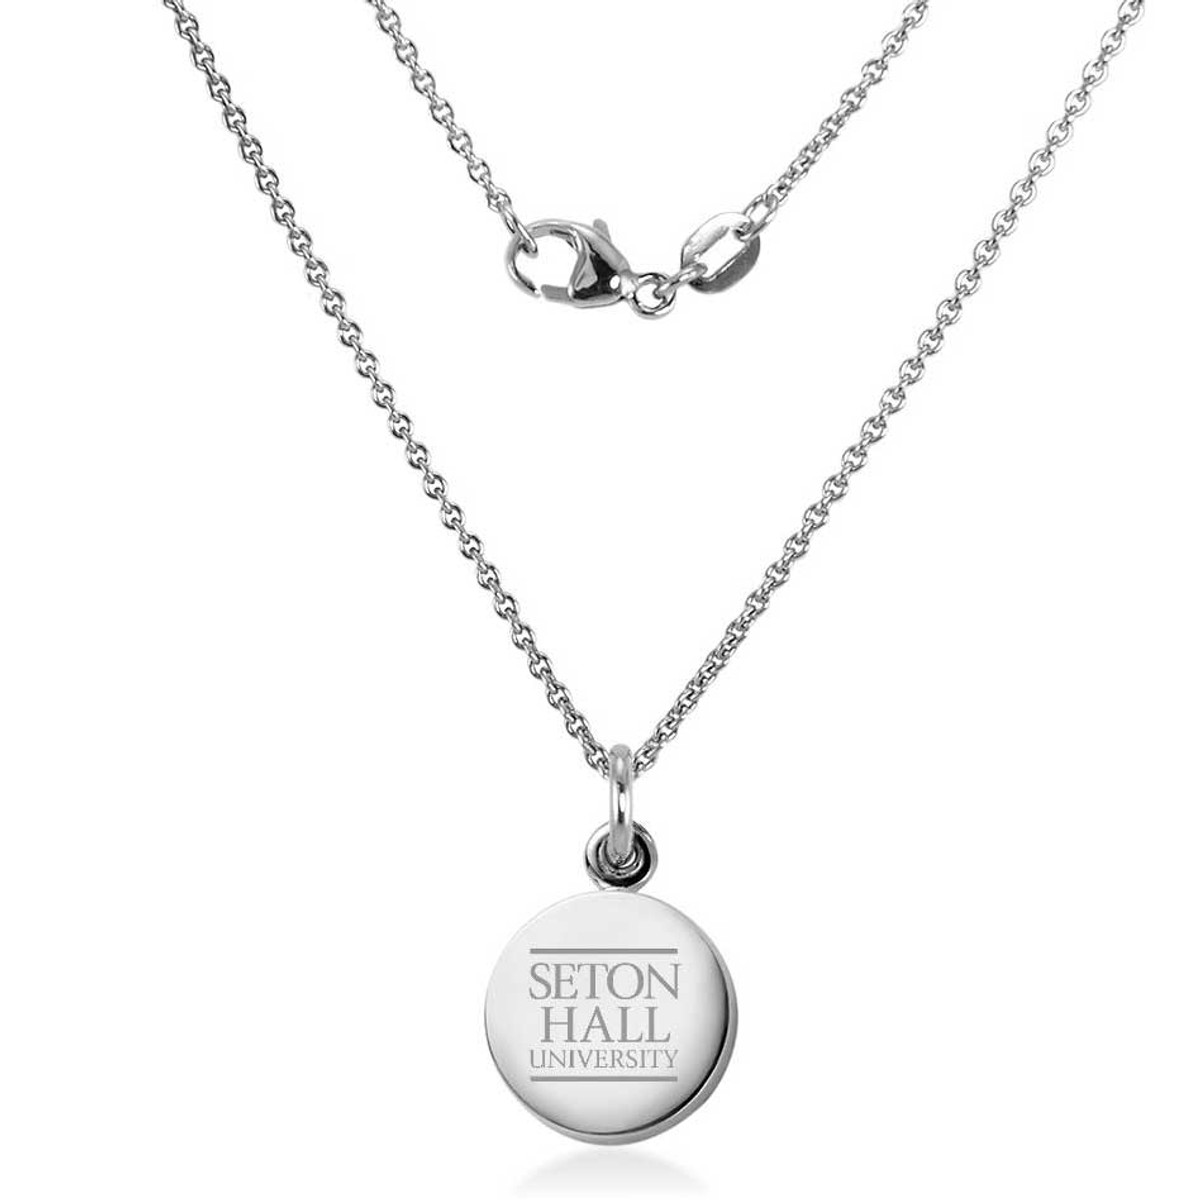 Seton Hall Necklace with Charm in Sterling Silver - Graduation Gift